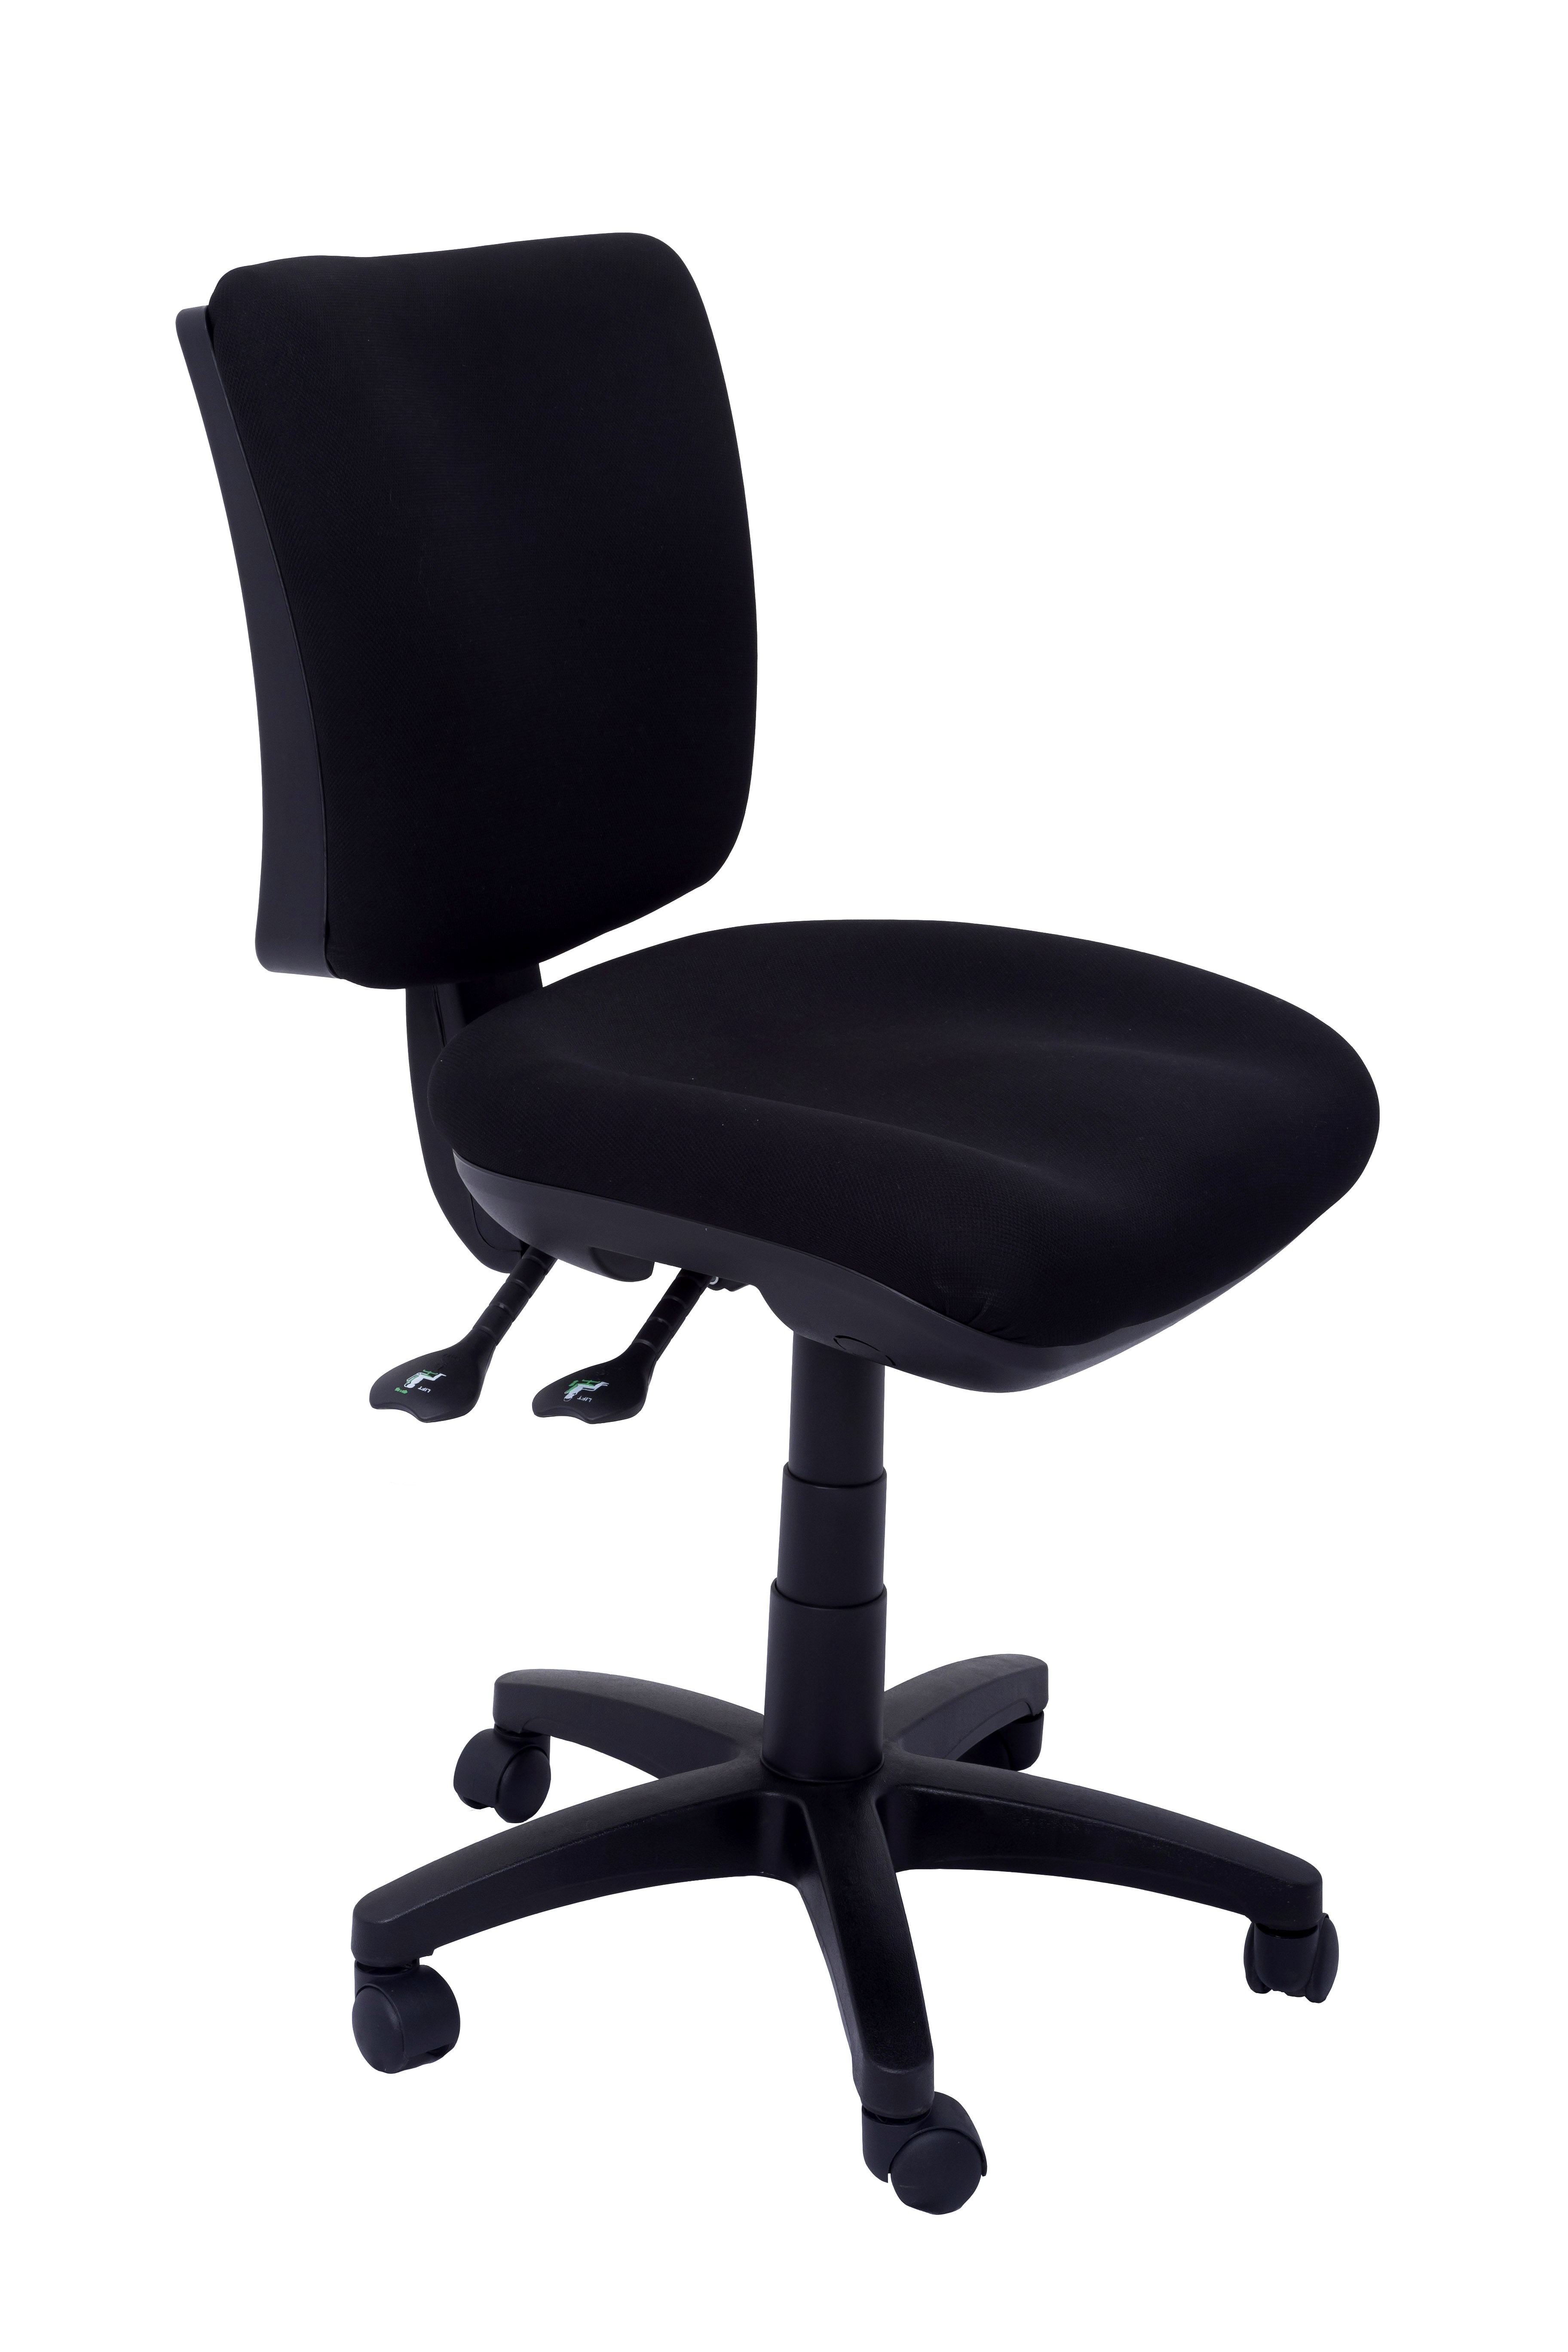 FEST50 TYPIST CHAIR | Office Direct QLD